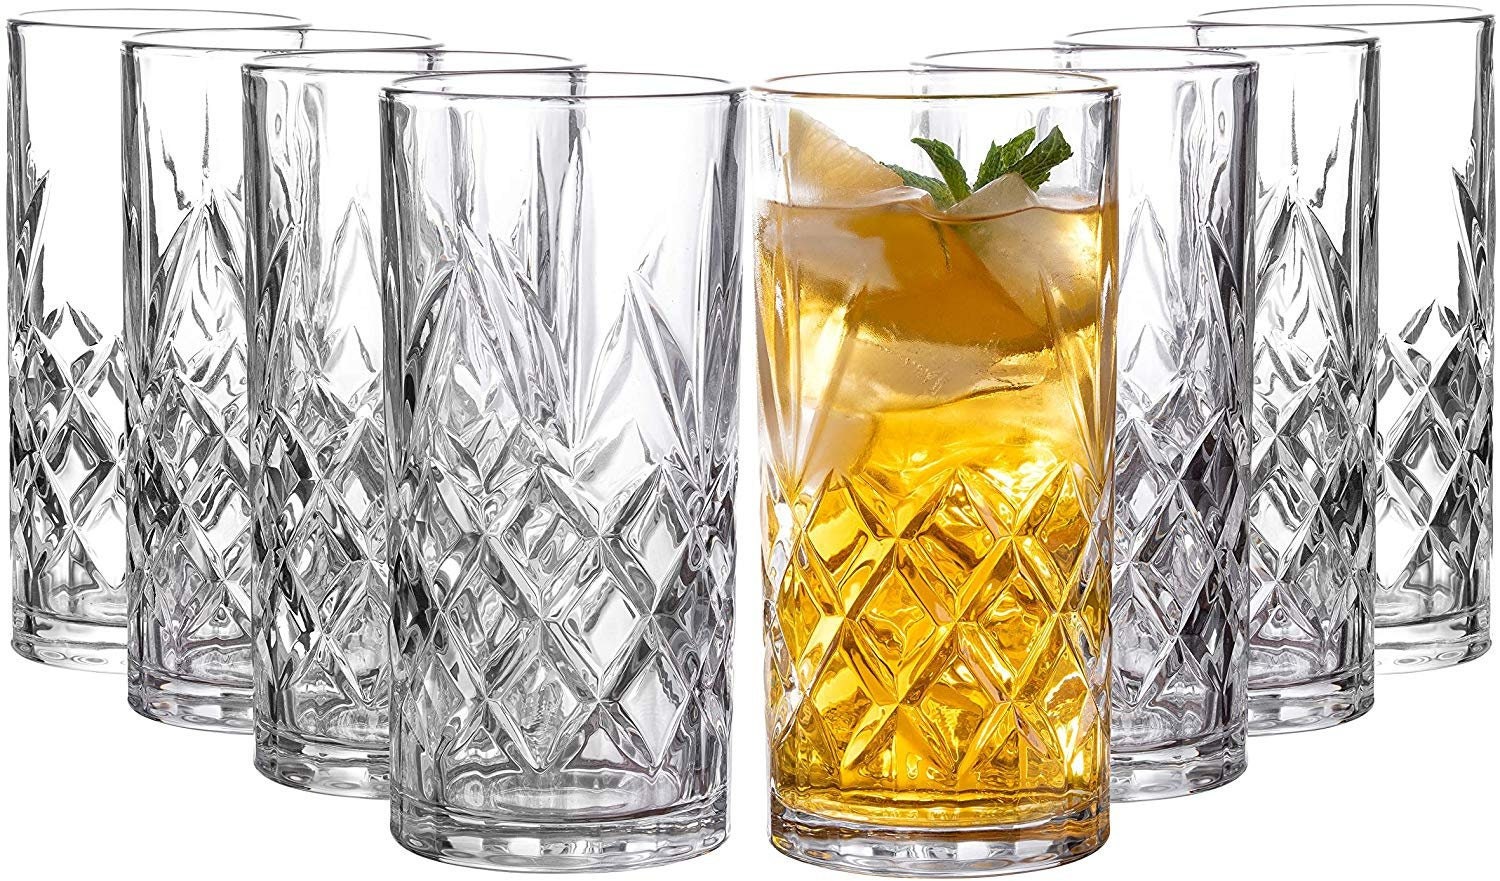 Red Series 16 oz Square Highball Beverage Drinking Glasses (Set of 8)